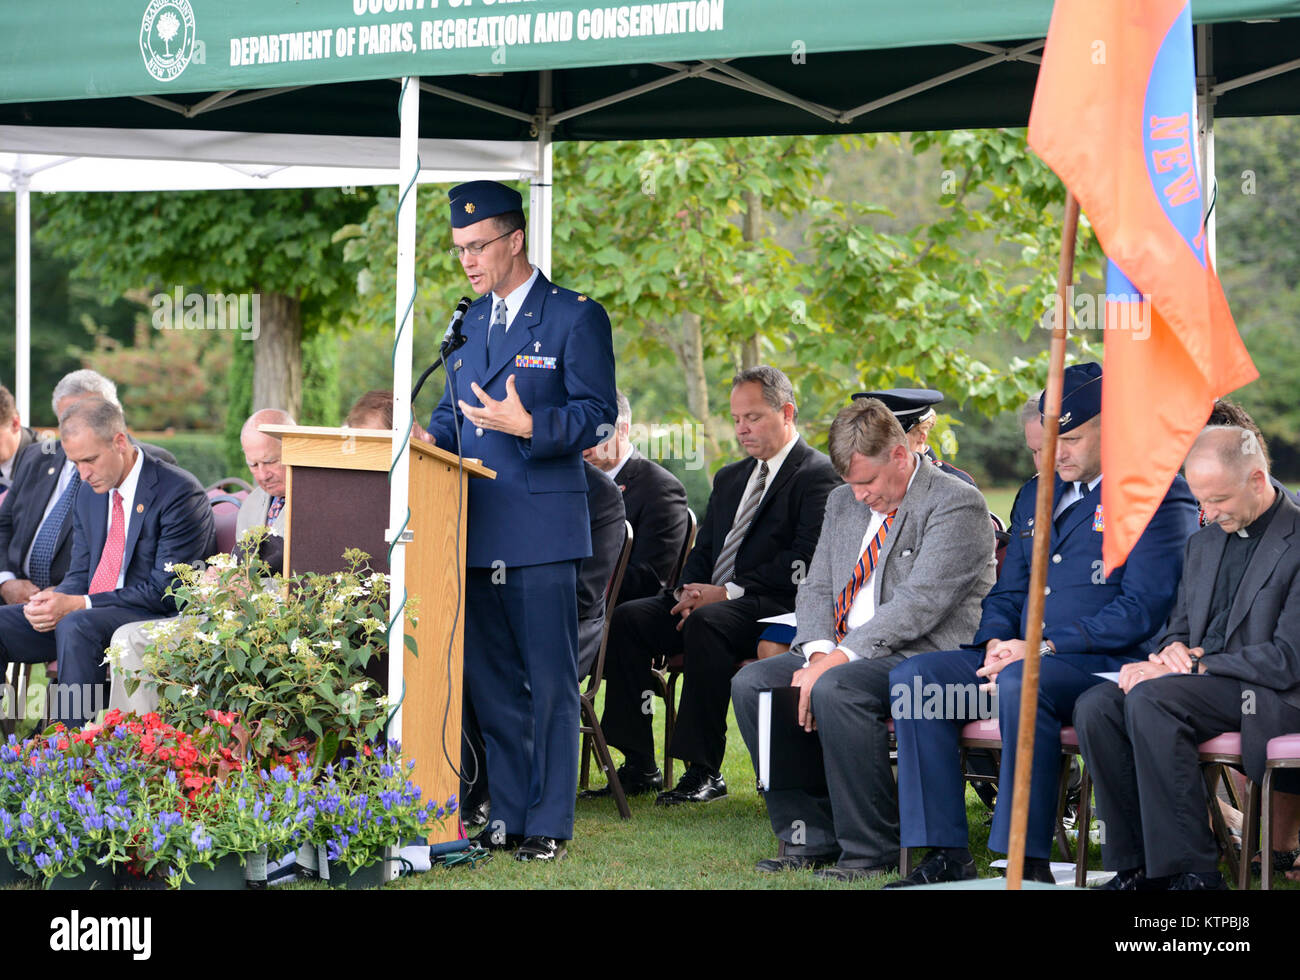 U.S Air Force Maj John L. Torres Jr., chaplain 105 Airlift Wing, New York Air National Guard, leading a prayer of remembrance at the Patriot Day, September 11th Remembrance ceremony held at the Orange County Arboretum, Thomas Bull Memorial Park, Montgomery, New York, Sept. 11, 2014. (U.S. Air Force photo by Tech. Sgt. Michael OHalloran/Released) Stock Photo